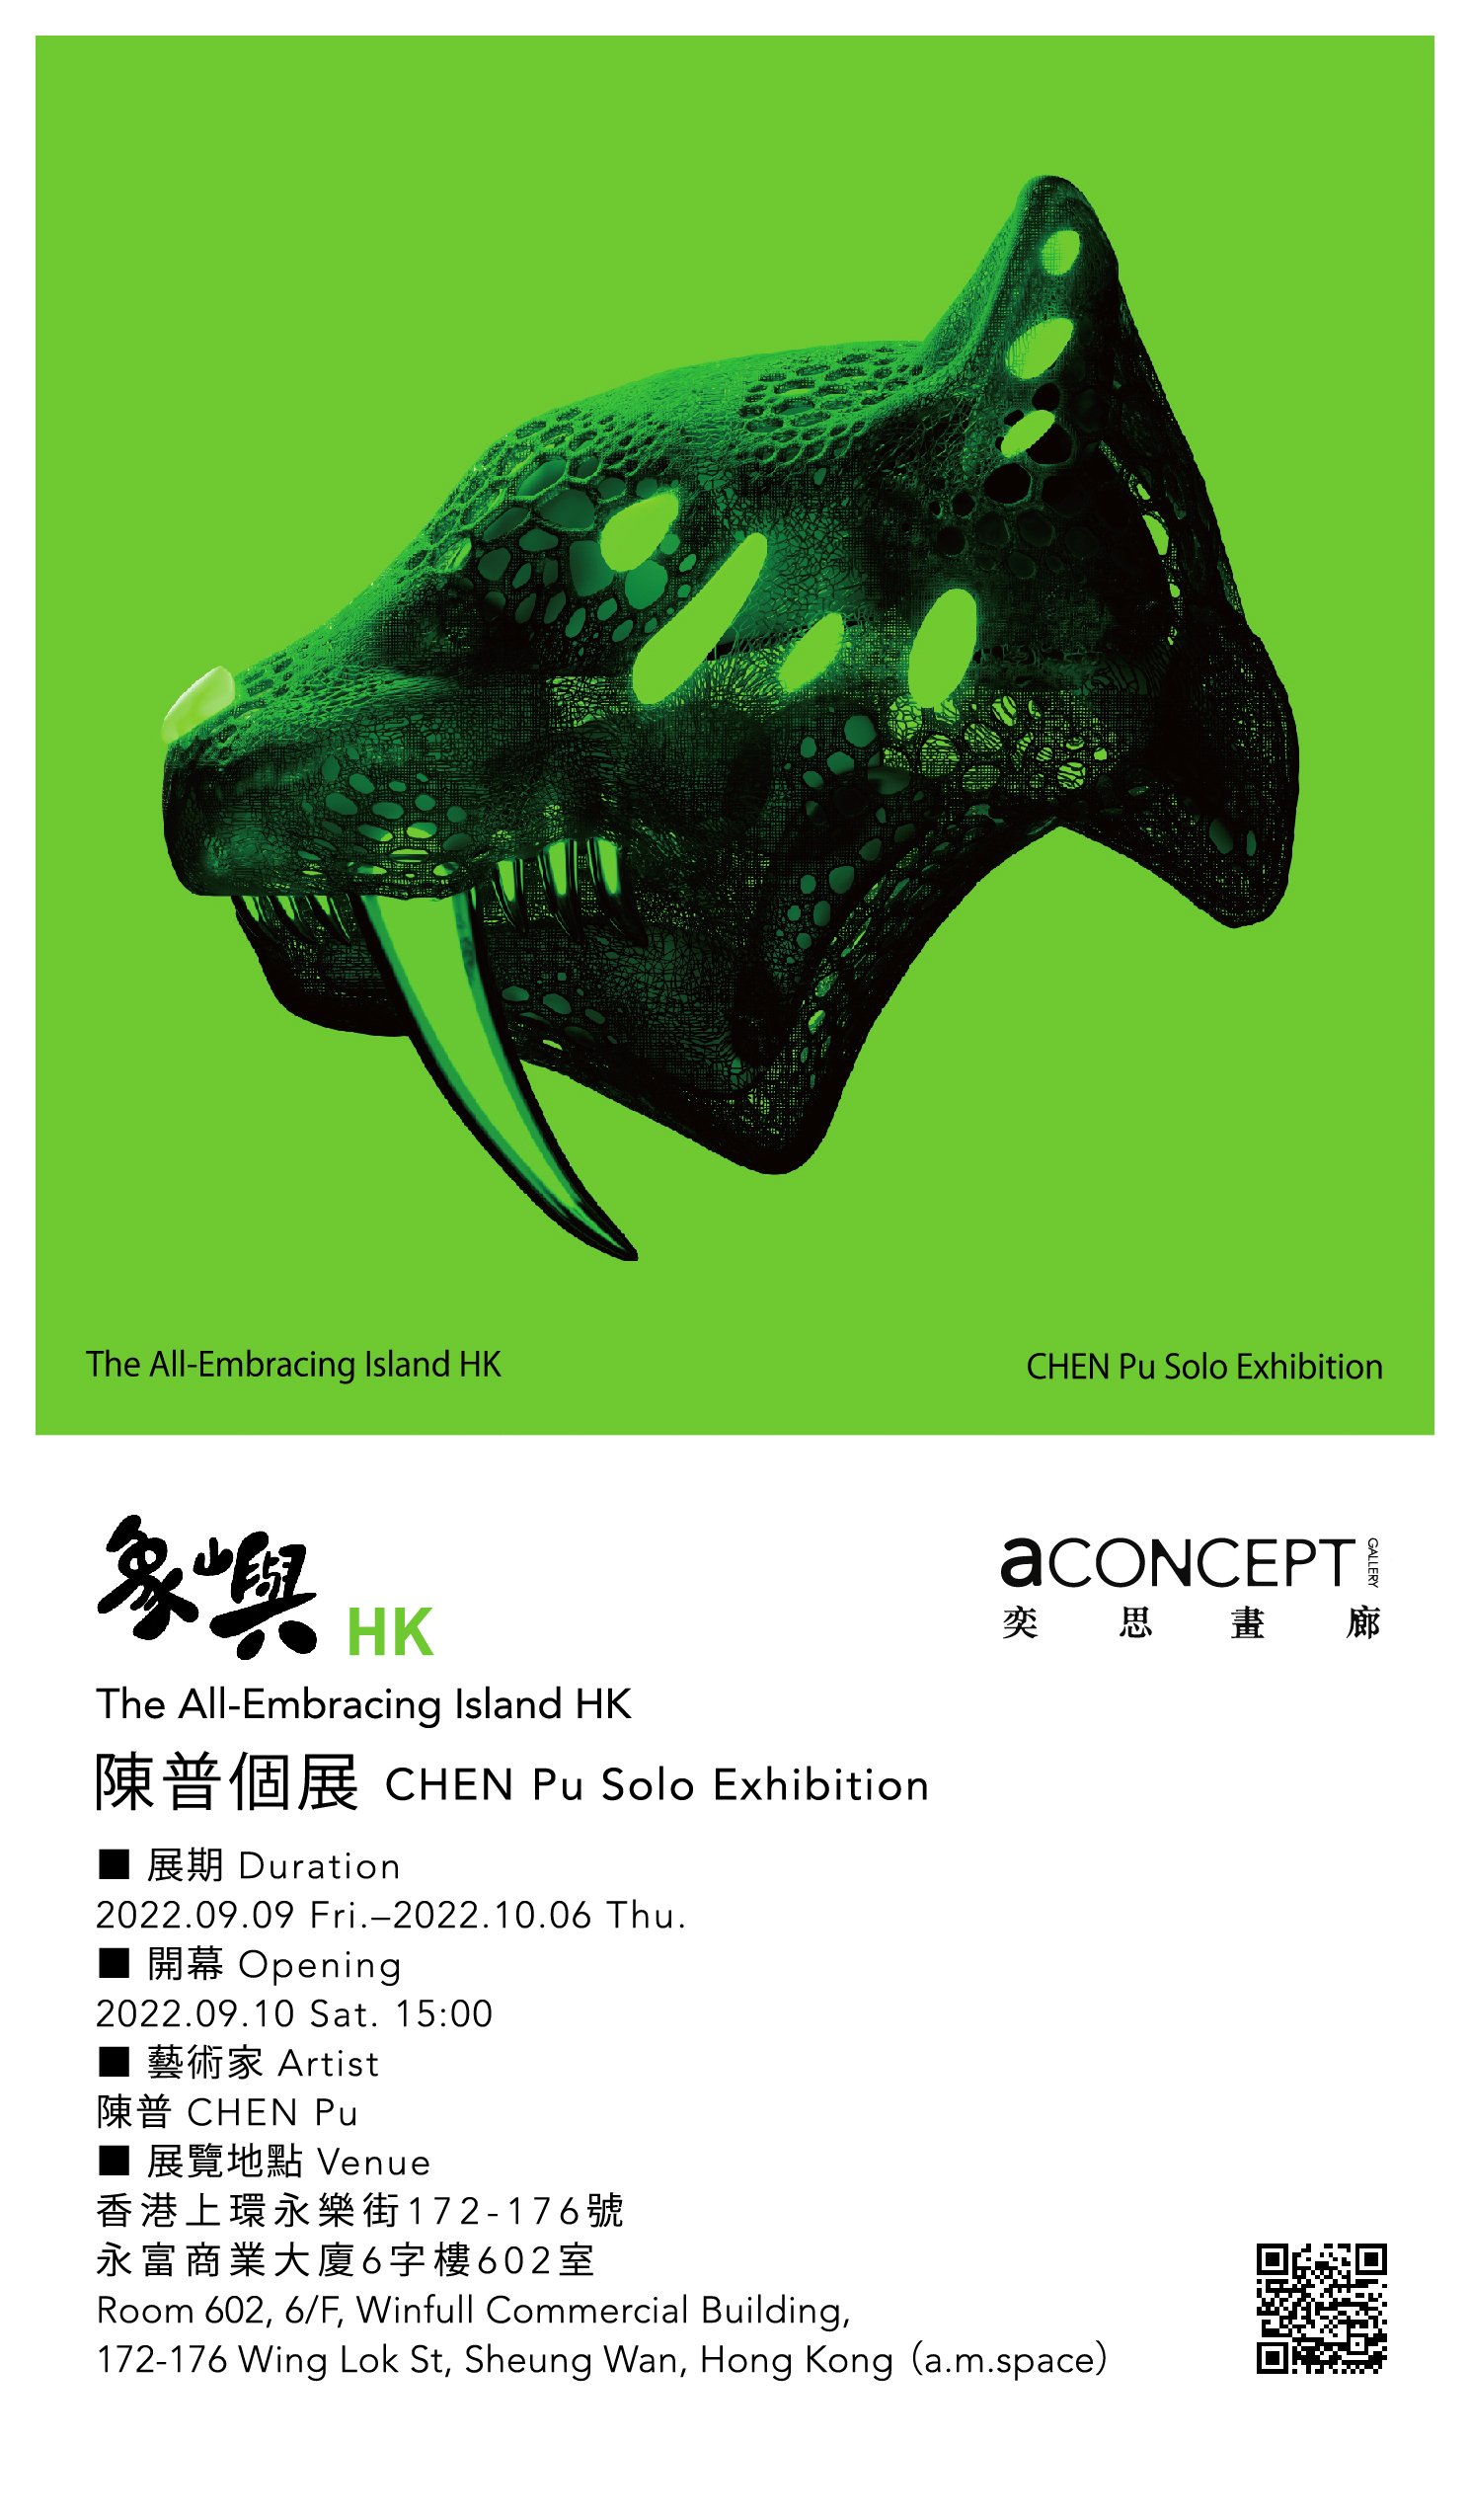 The All-Embracing Island HK _CHEN Pu Solo Exhibition ｜A Concept Gallery